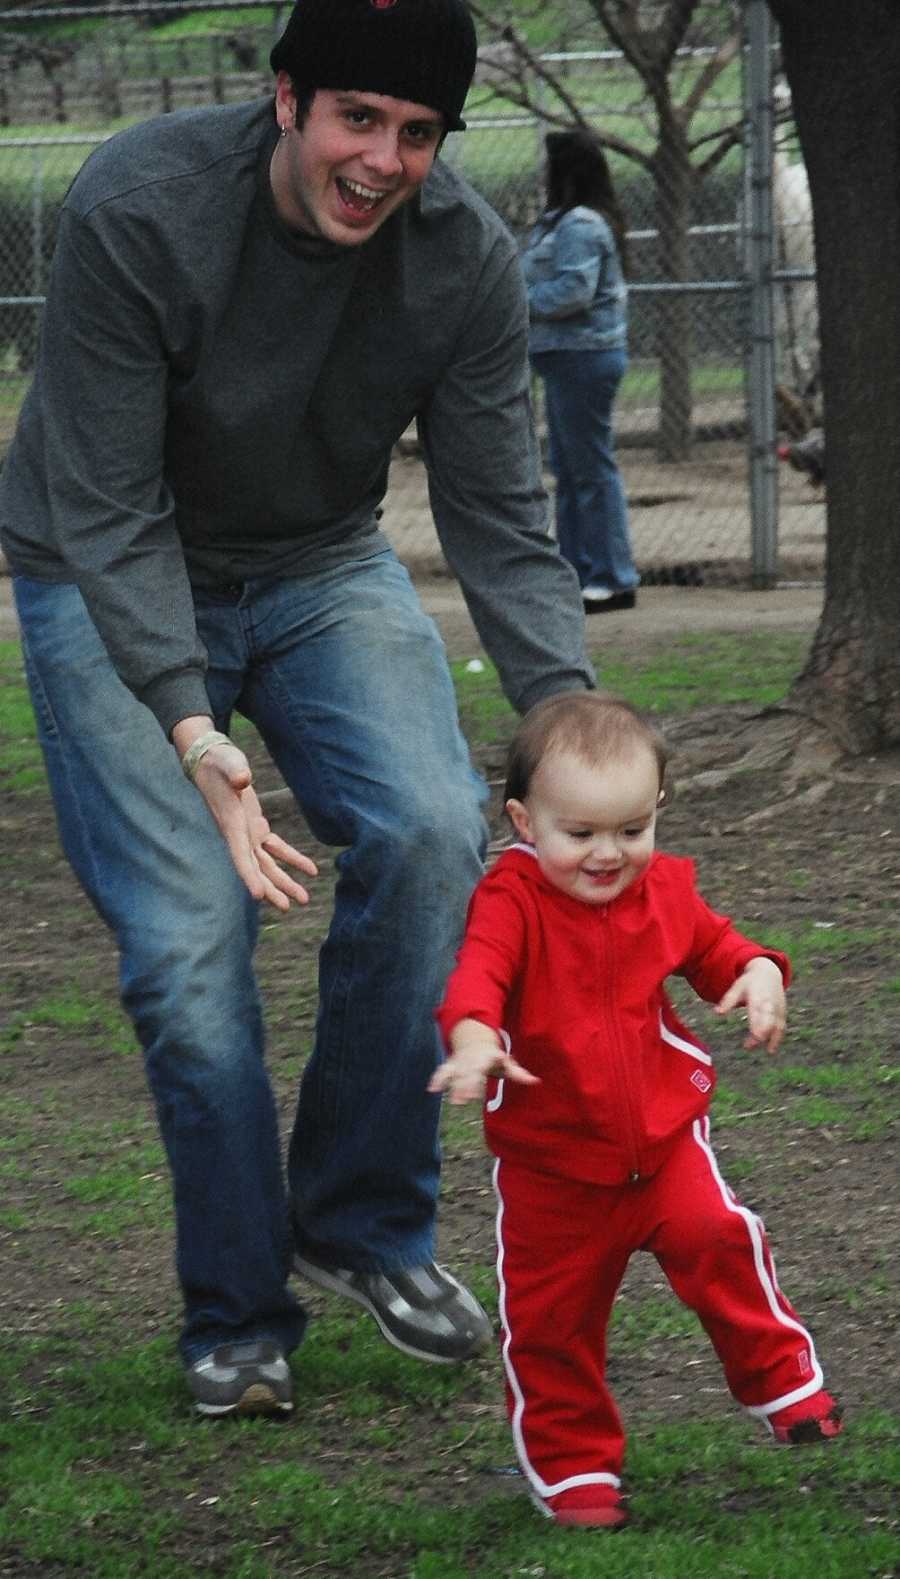 Single father smiling while walking behind toddler daughter in park